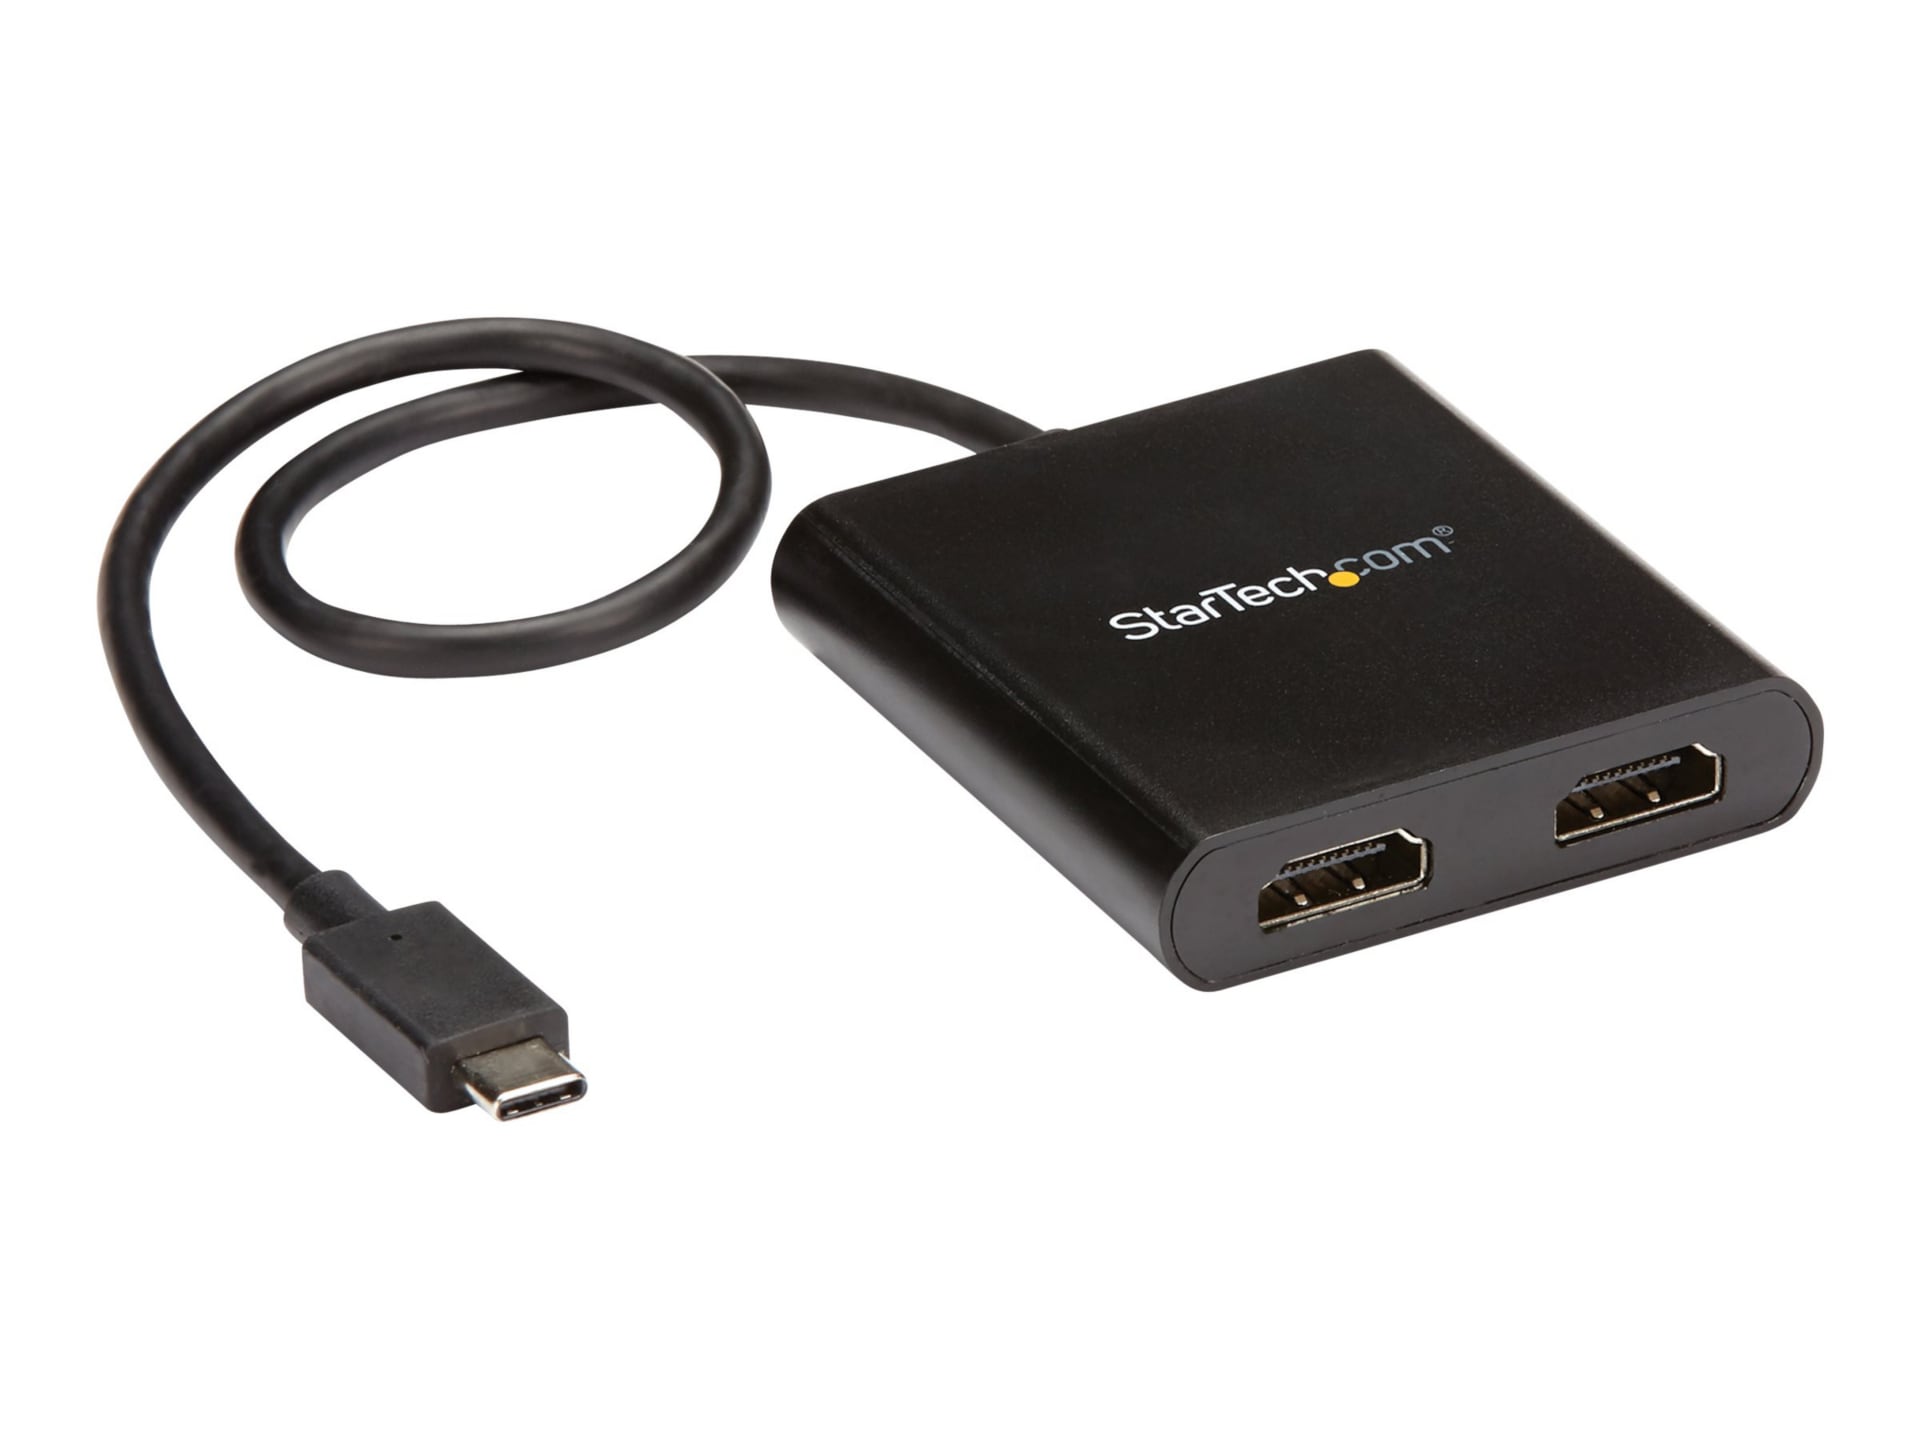 Morse kode Indtægter Afbrydelse StarTech.com USB-C to Dual HDMI Adapter, USB Type-C Laptop Multi-Monitor  MST Hub / Display Splitter, 2x 4K 30Hz, Windows - MSTCDP122HD - Monitor  Cables & Adapters - CDW.com